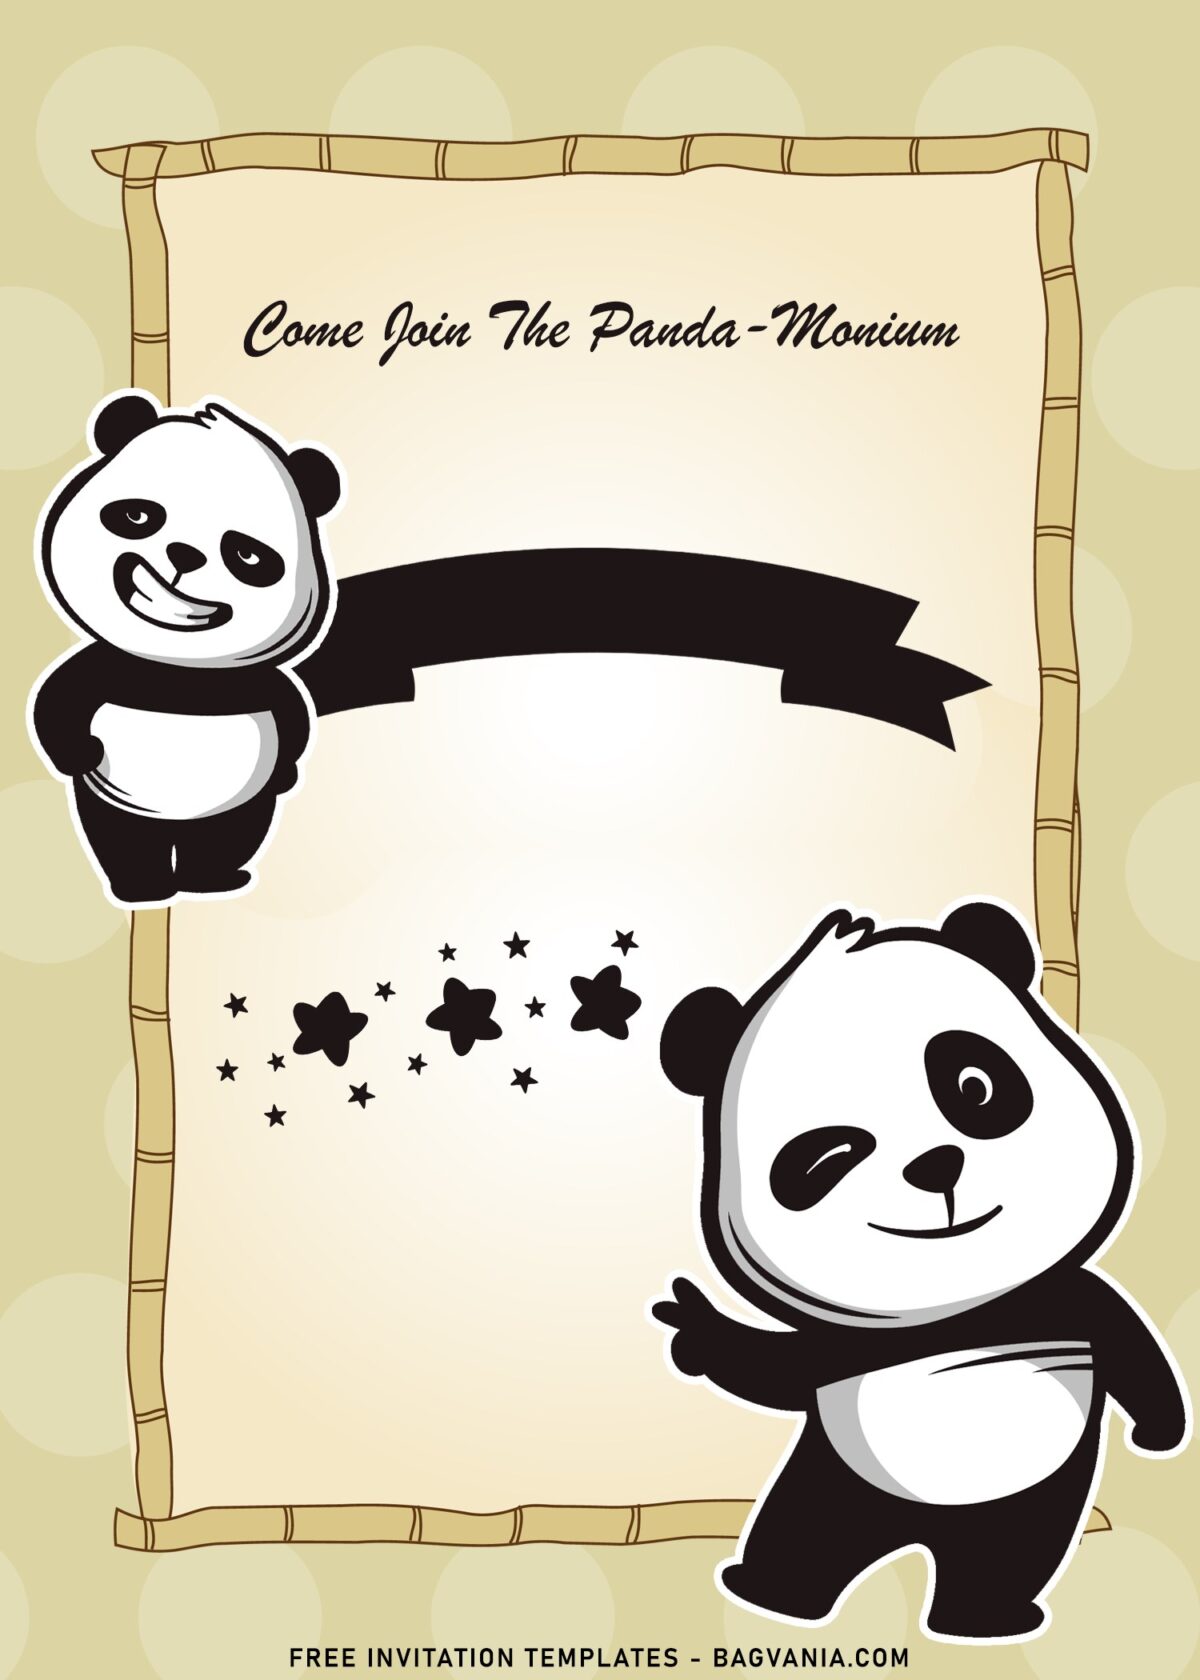 9+ Funny Panda Birthday Invitation Templates For Your Kid's Birthday with adorable bamboo frame text box